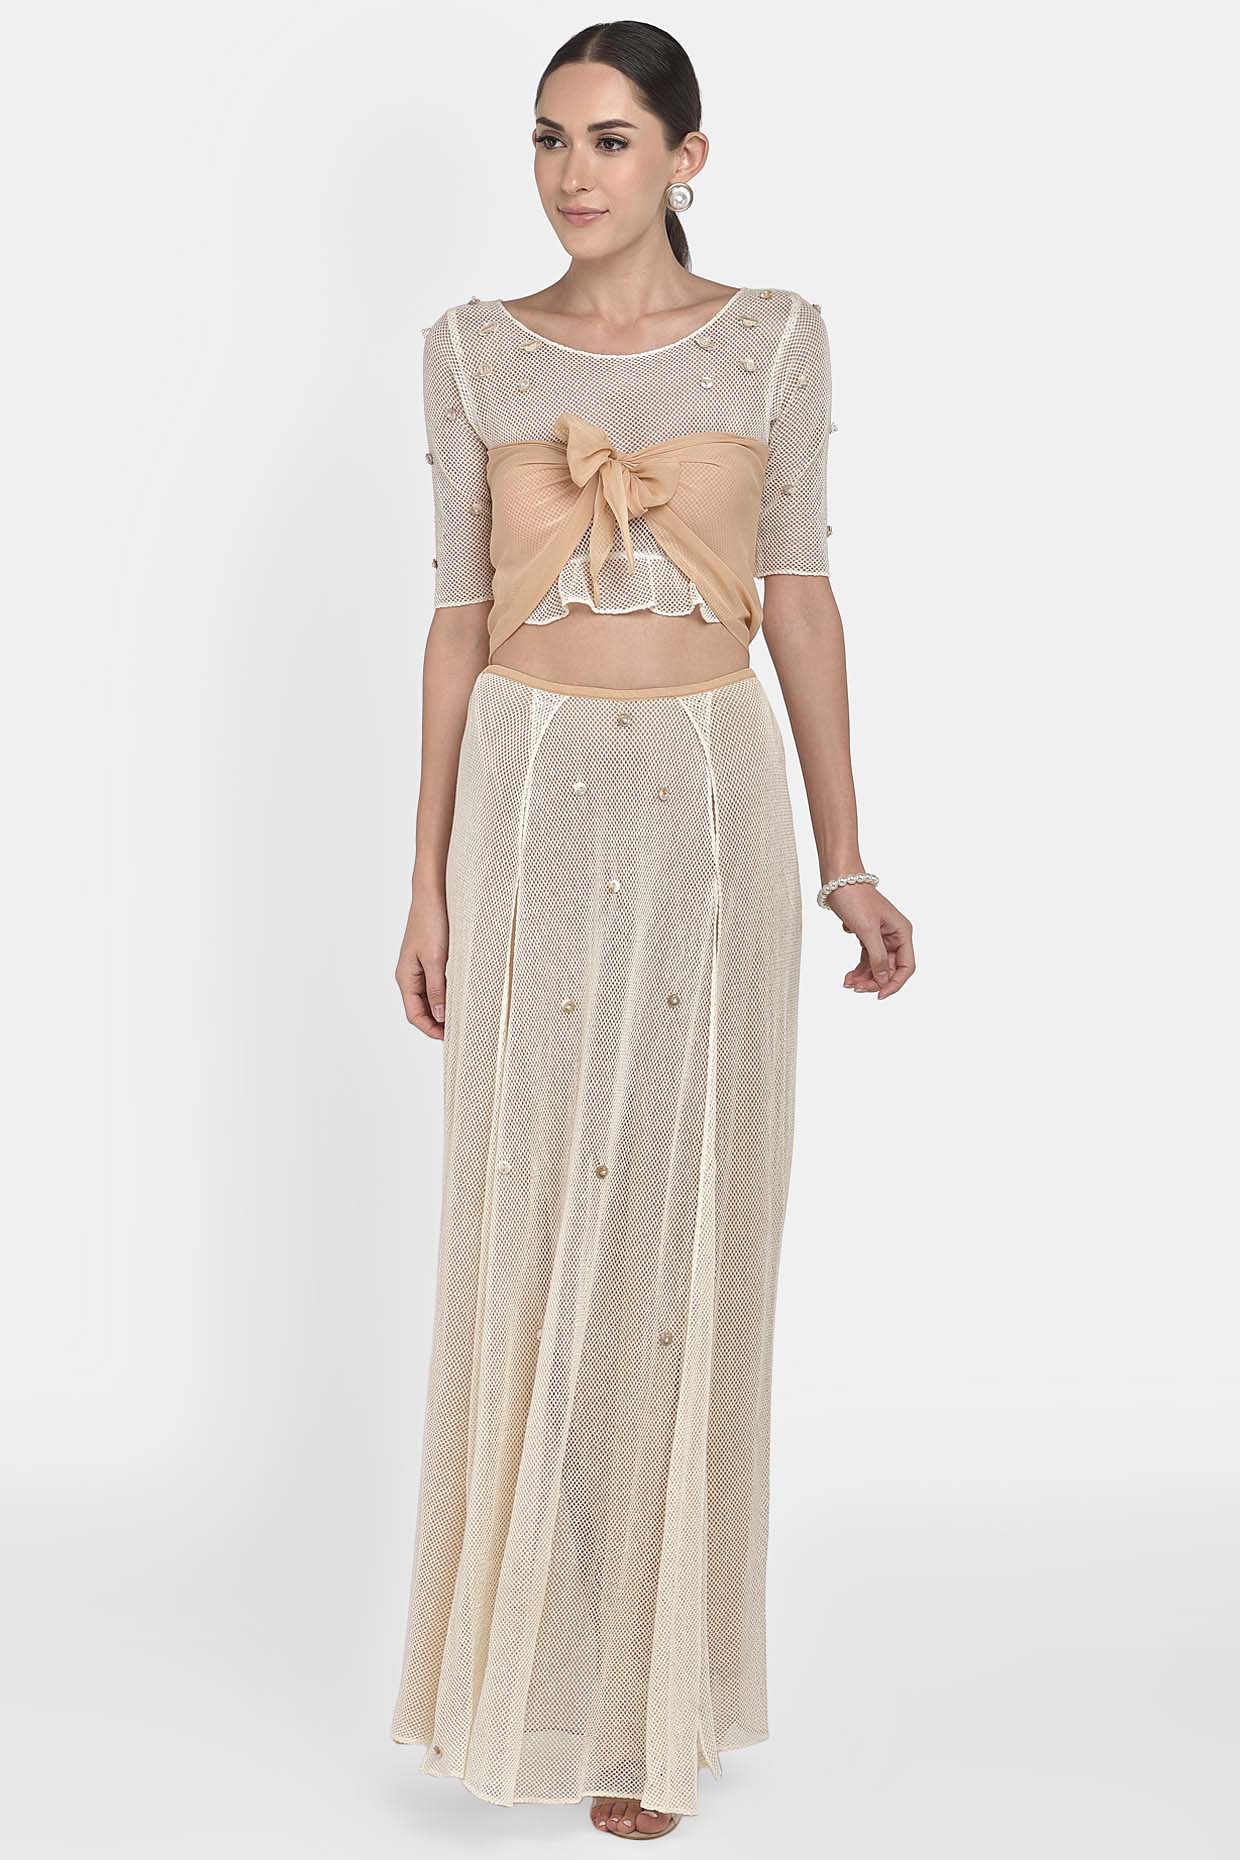 Off White Mesh Crop Top & Slit Pant Skirt With Embellishments